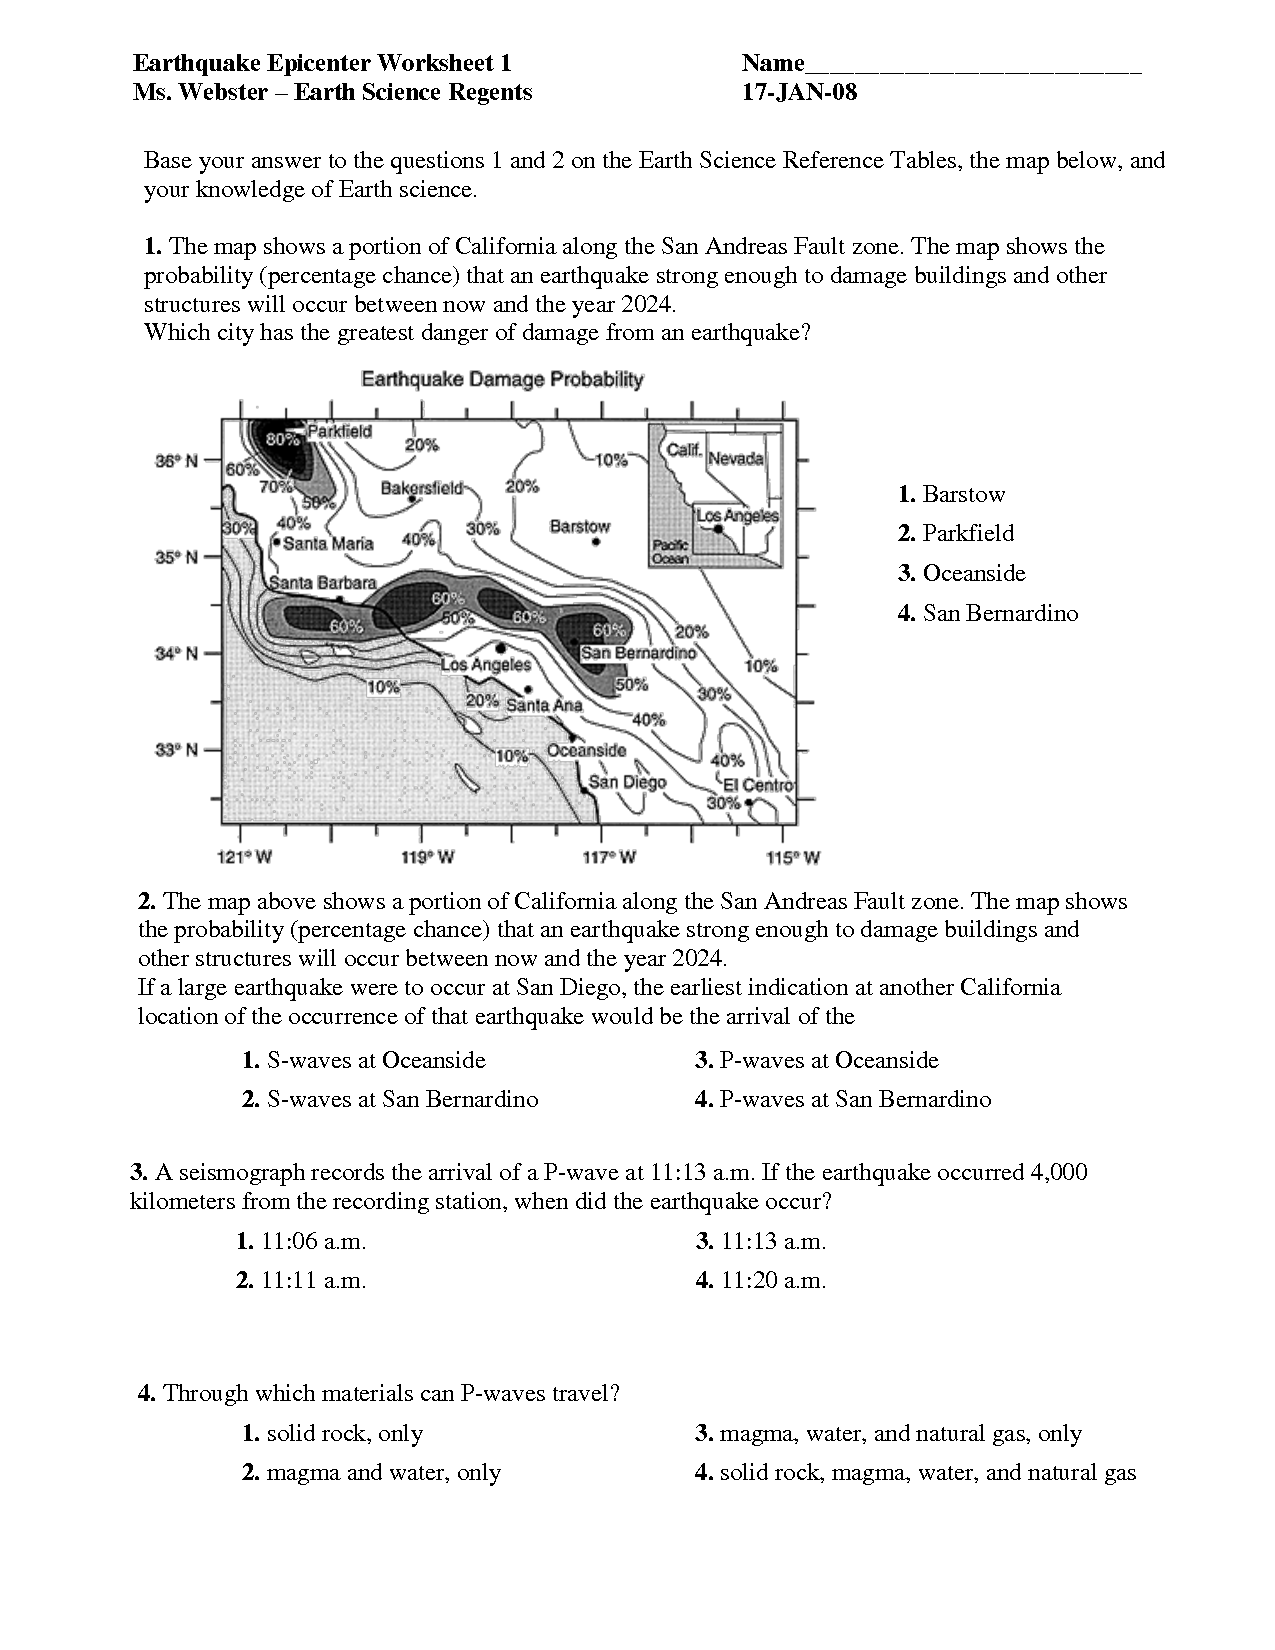 Earthquake Worksheets Middle School Image